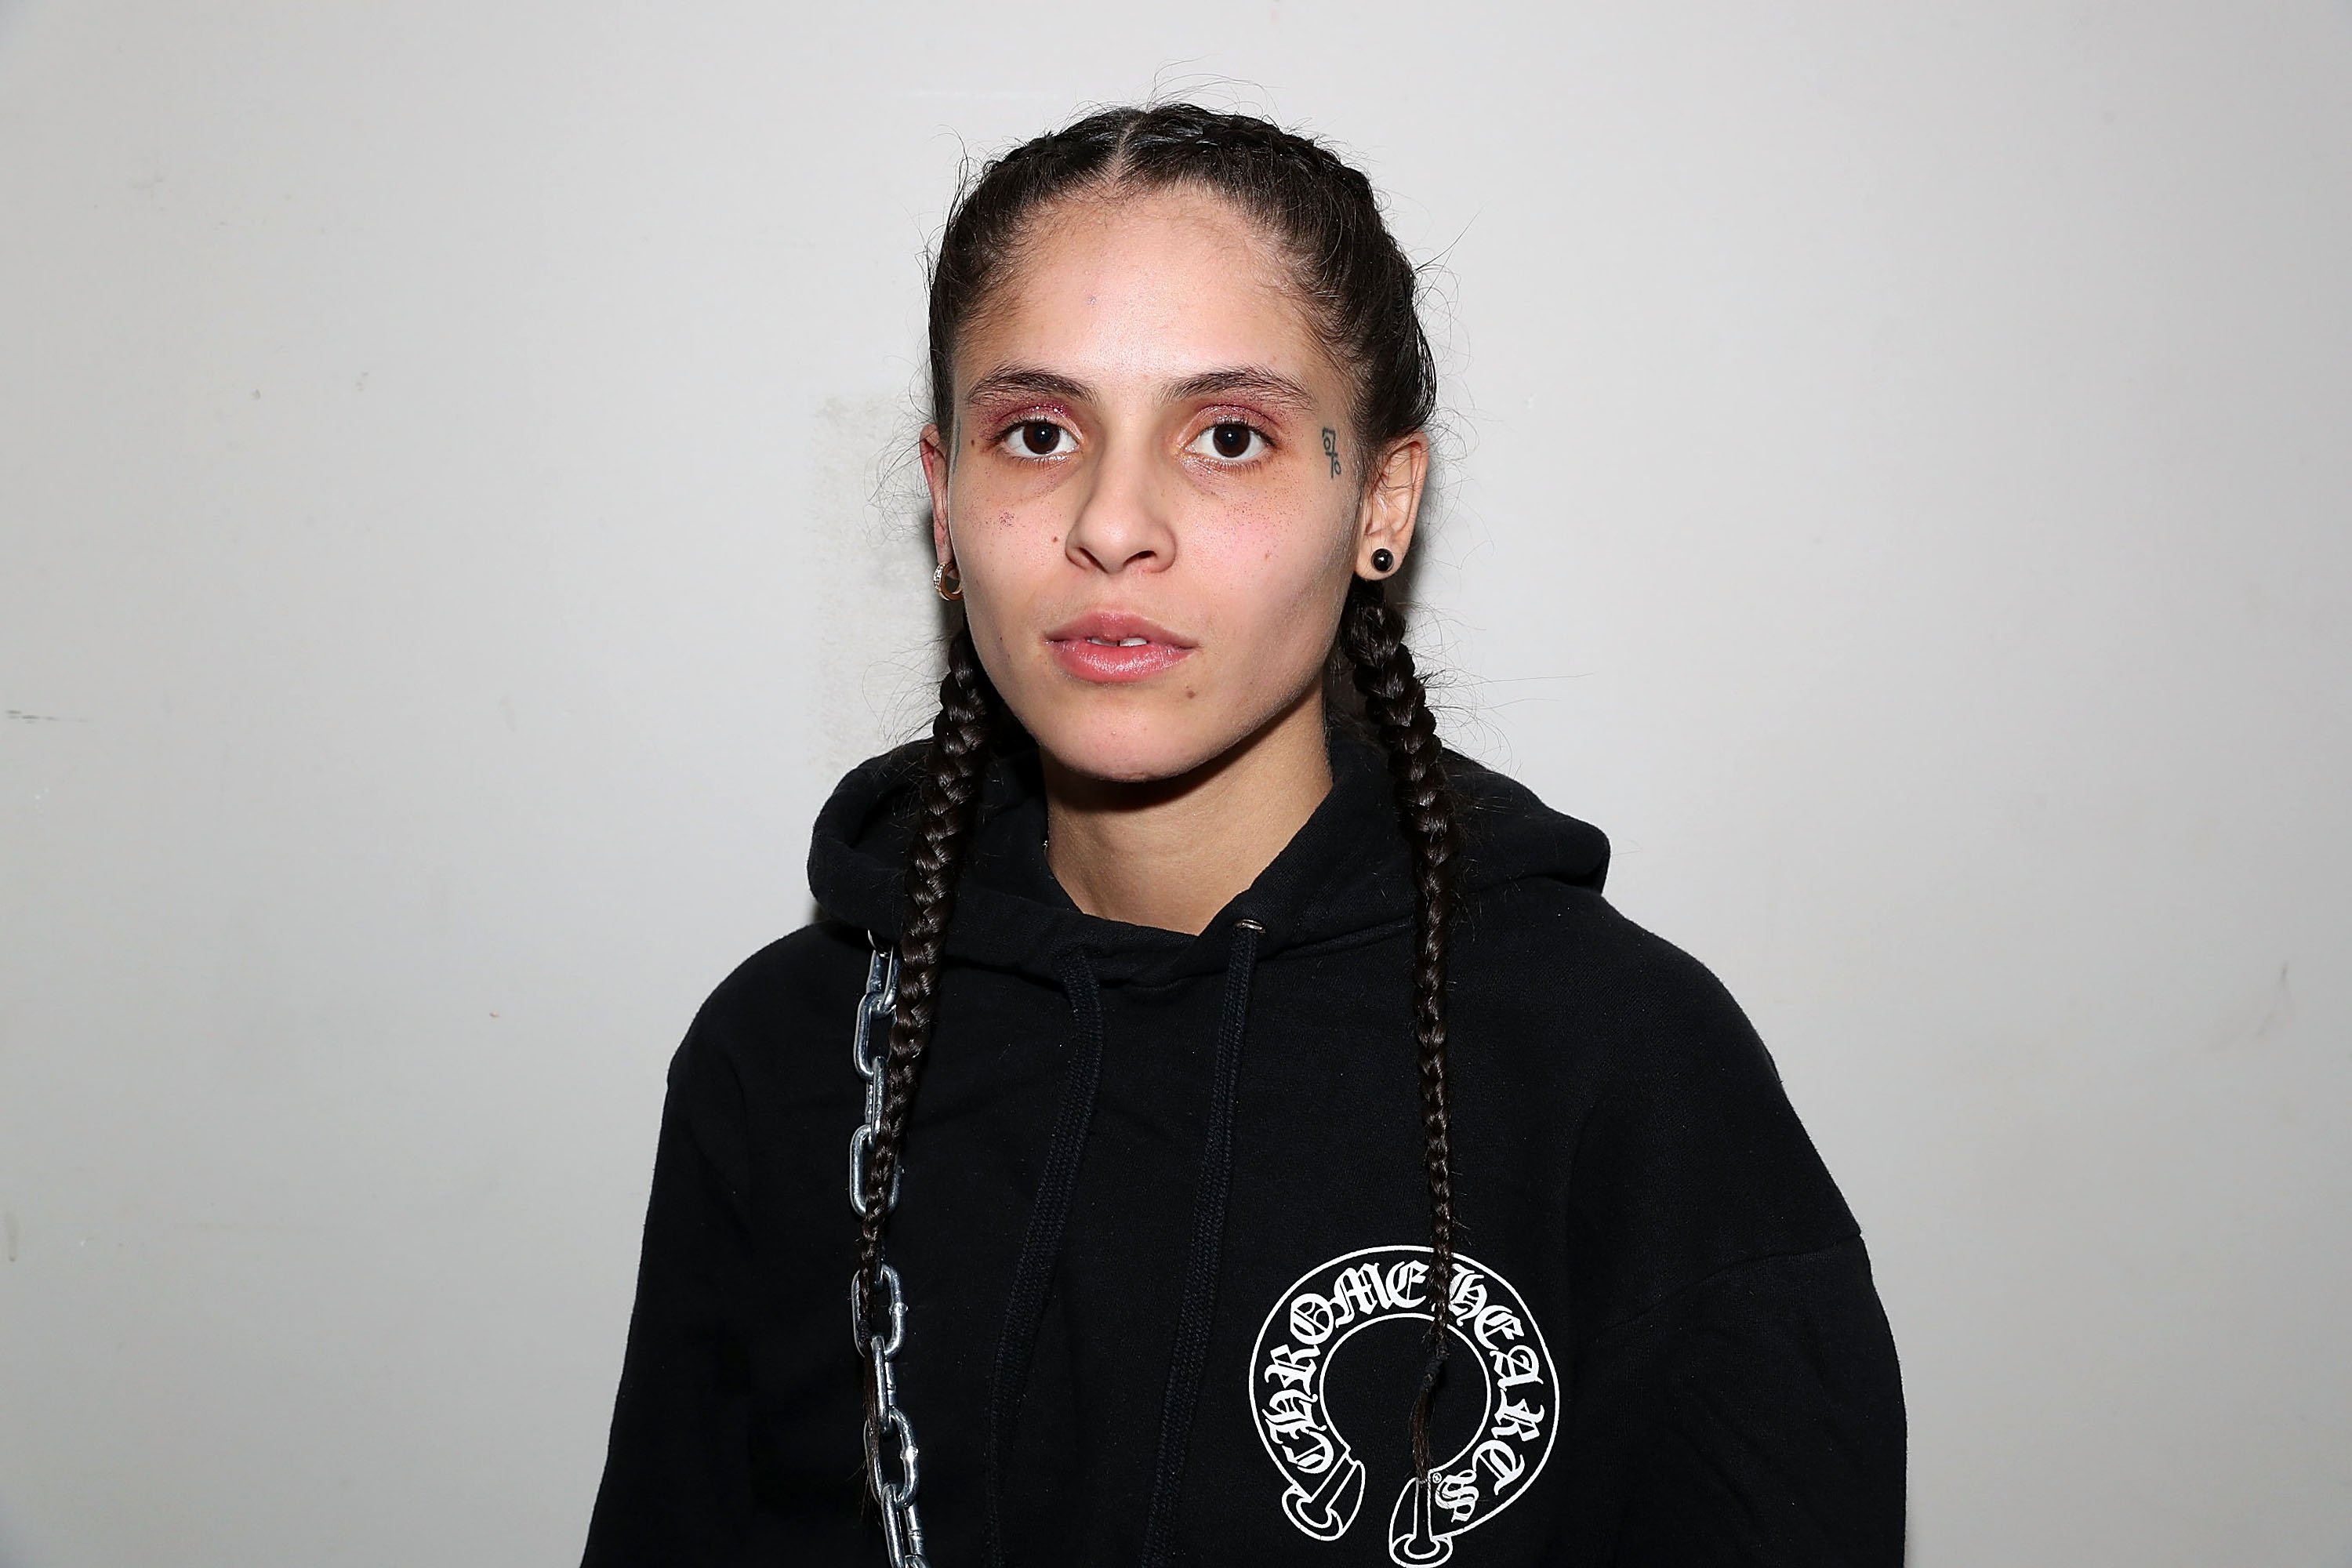 070 Shake attends 070 Shake "The Glitter LP" Release Party at Public Arts on March 26, 2018, in New York City. | Source: Getty Images